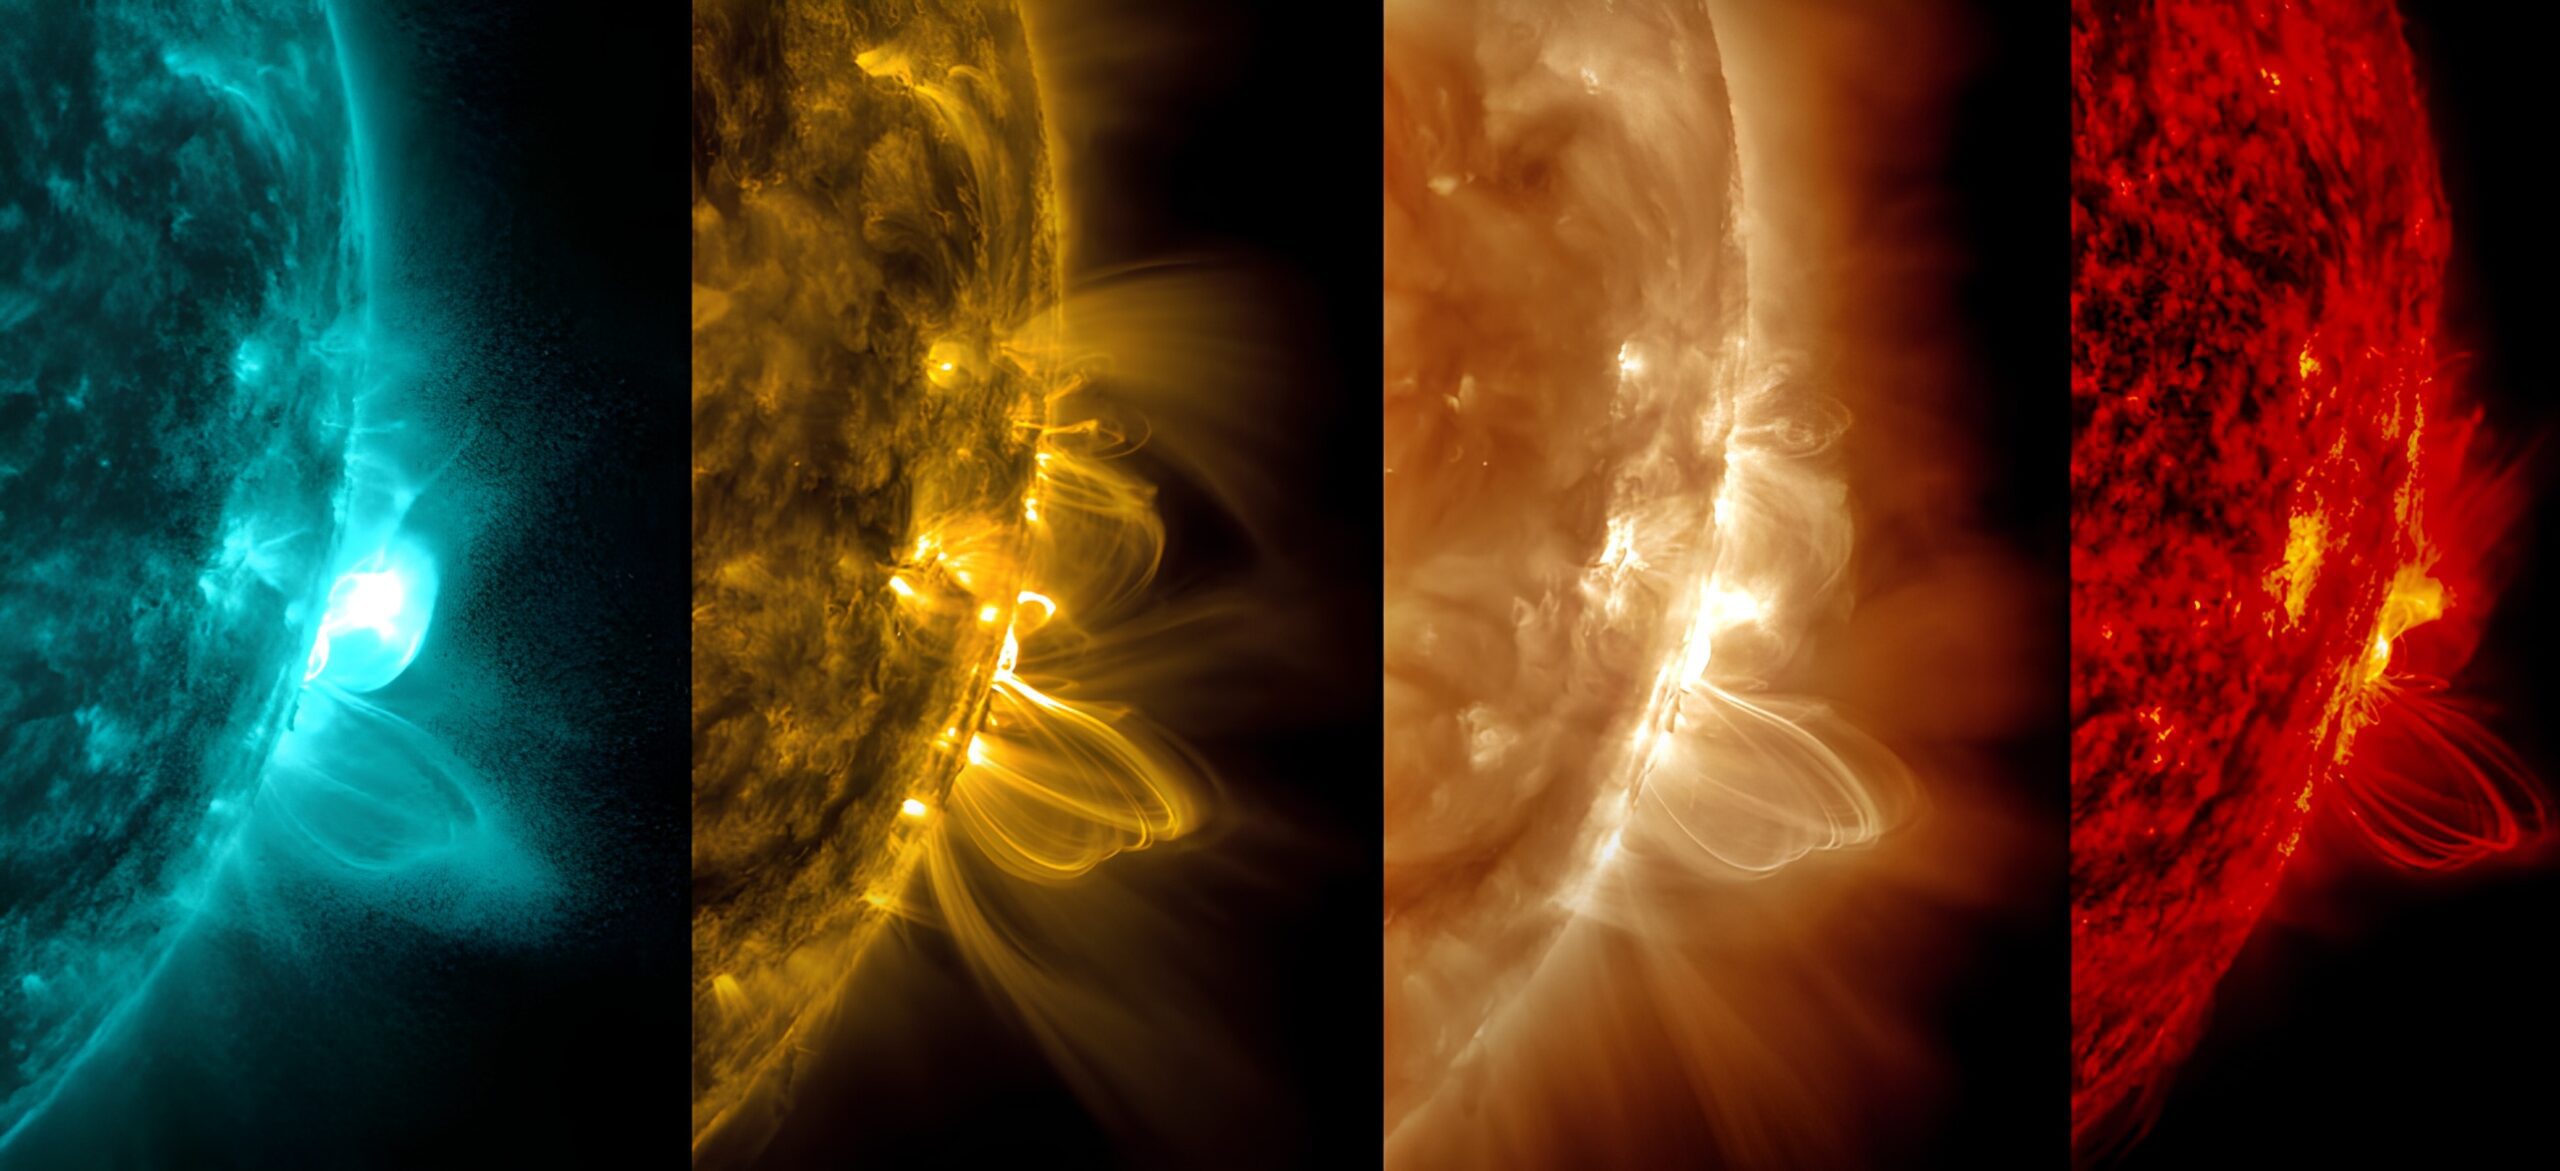 Tracking the Strongest Solar Storm: Current Affairs Question and Answers